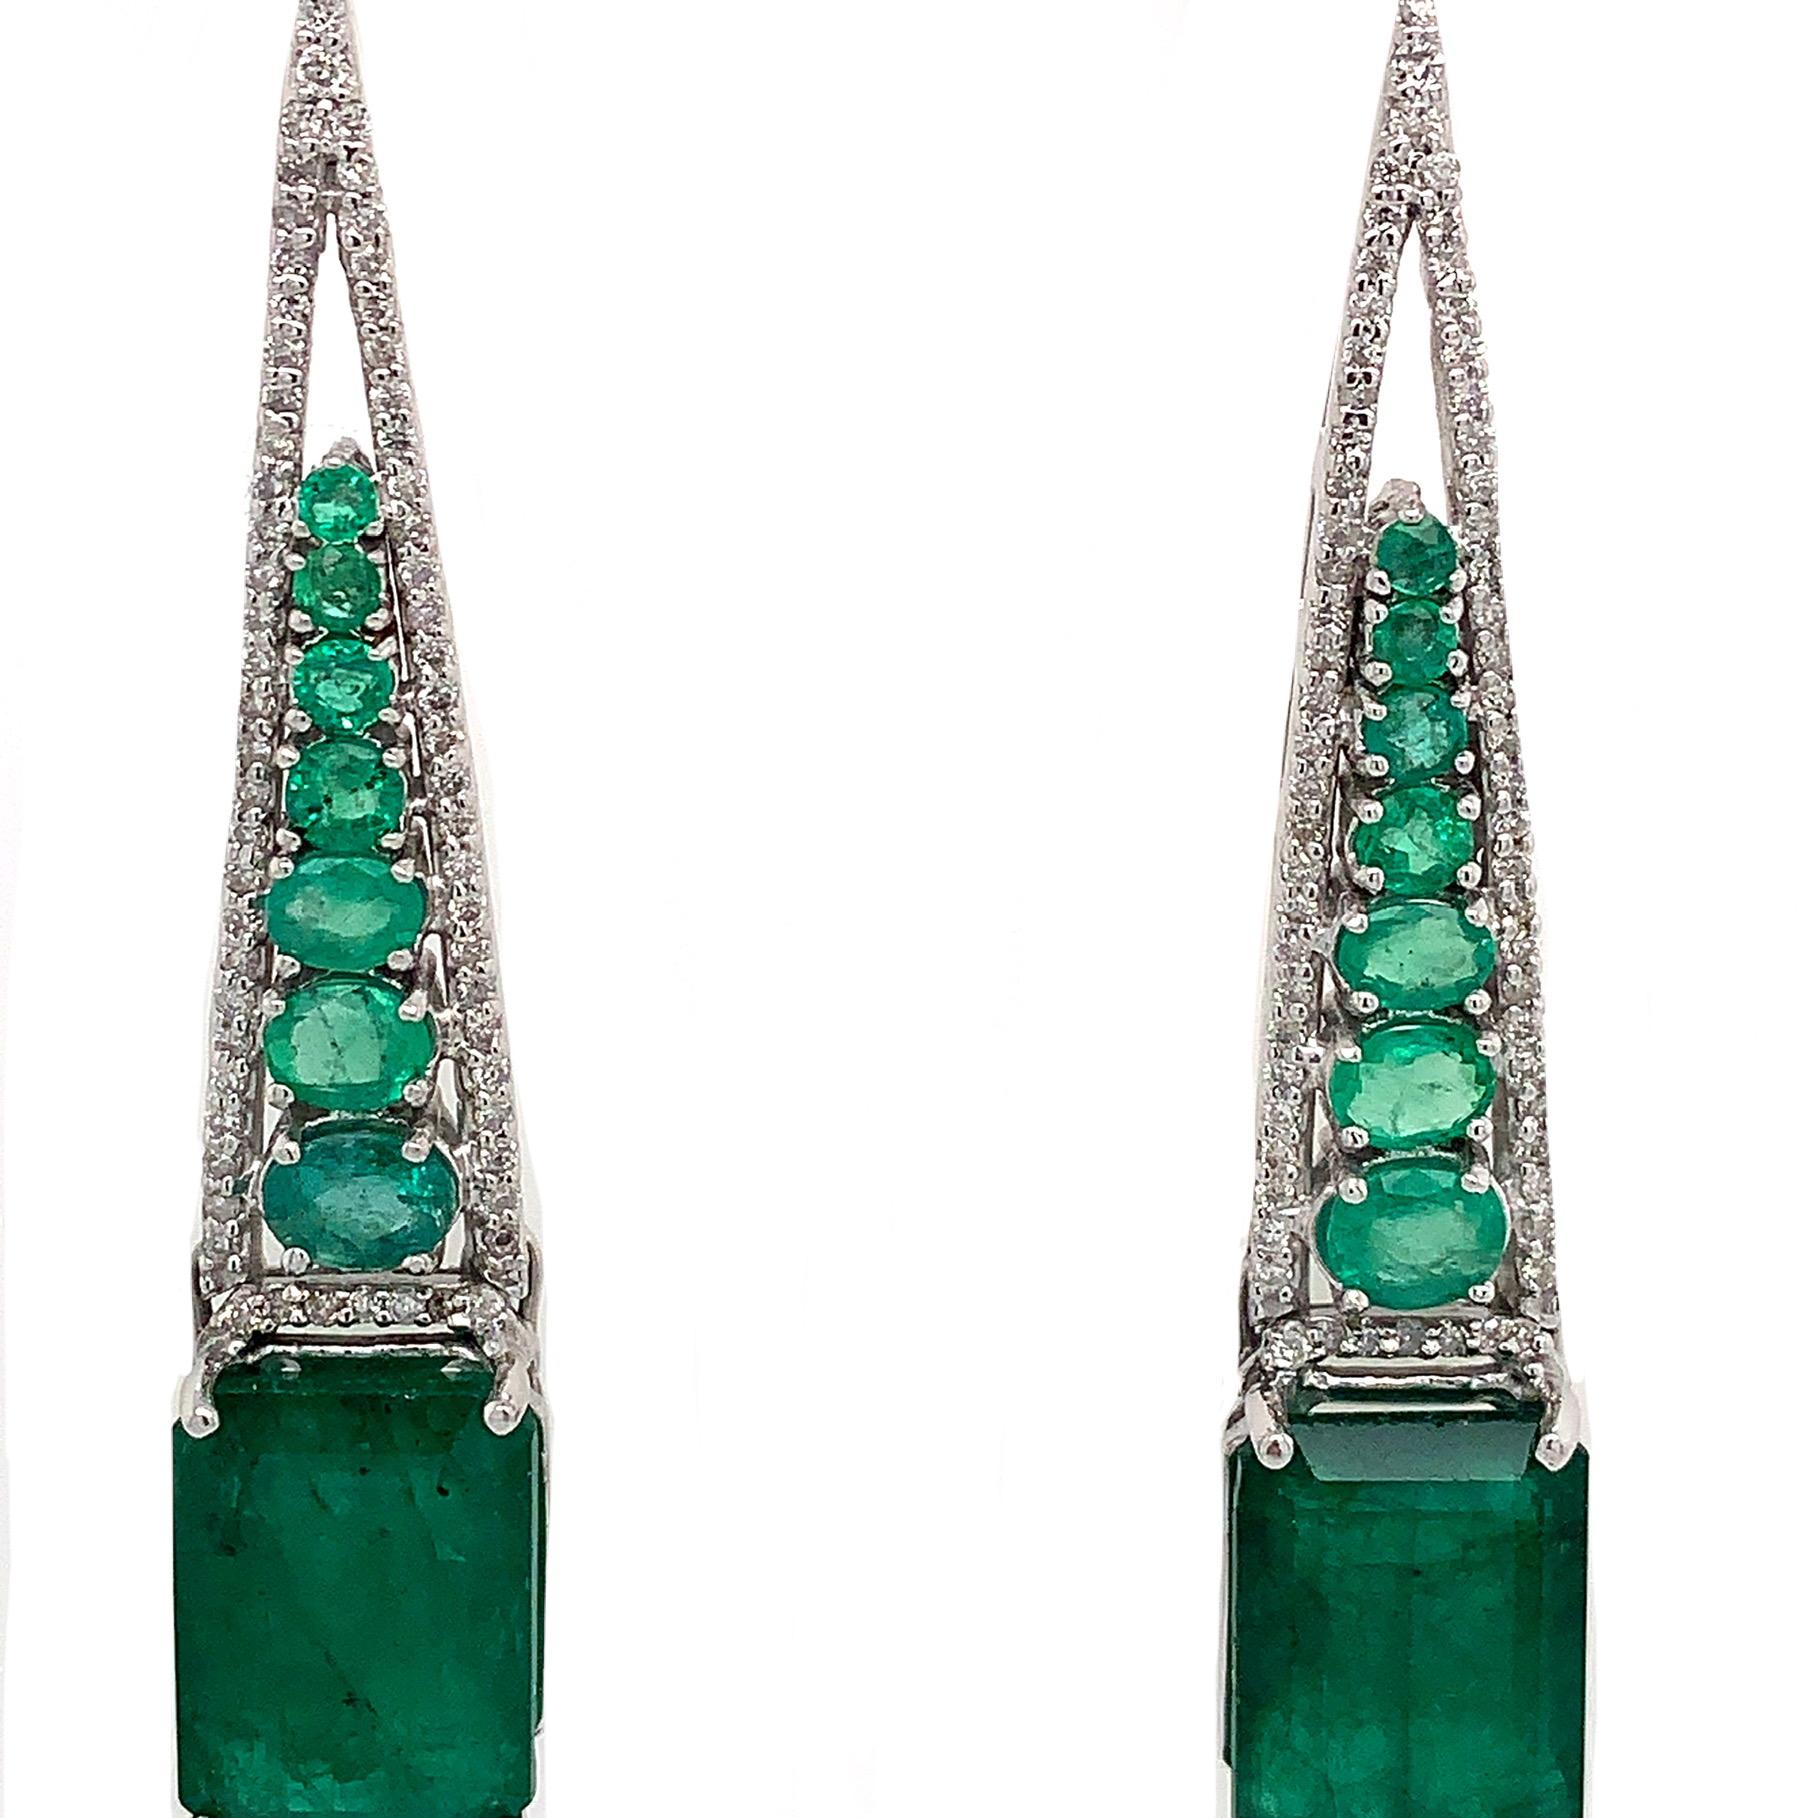 Green Lagoon Collection

Emerald and Diamond drop dangle earrings set in 18K white gold.

Emerald: 14.37ct total weight.
Diamonds: 1.09ct total weight.
All diamonds are G-H/SI stones.